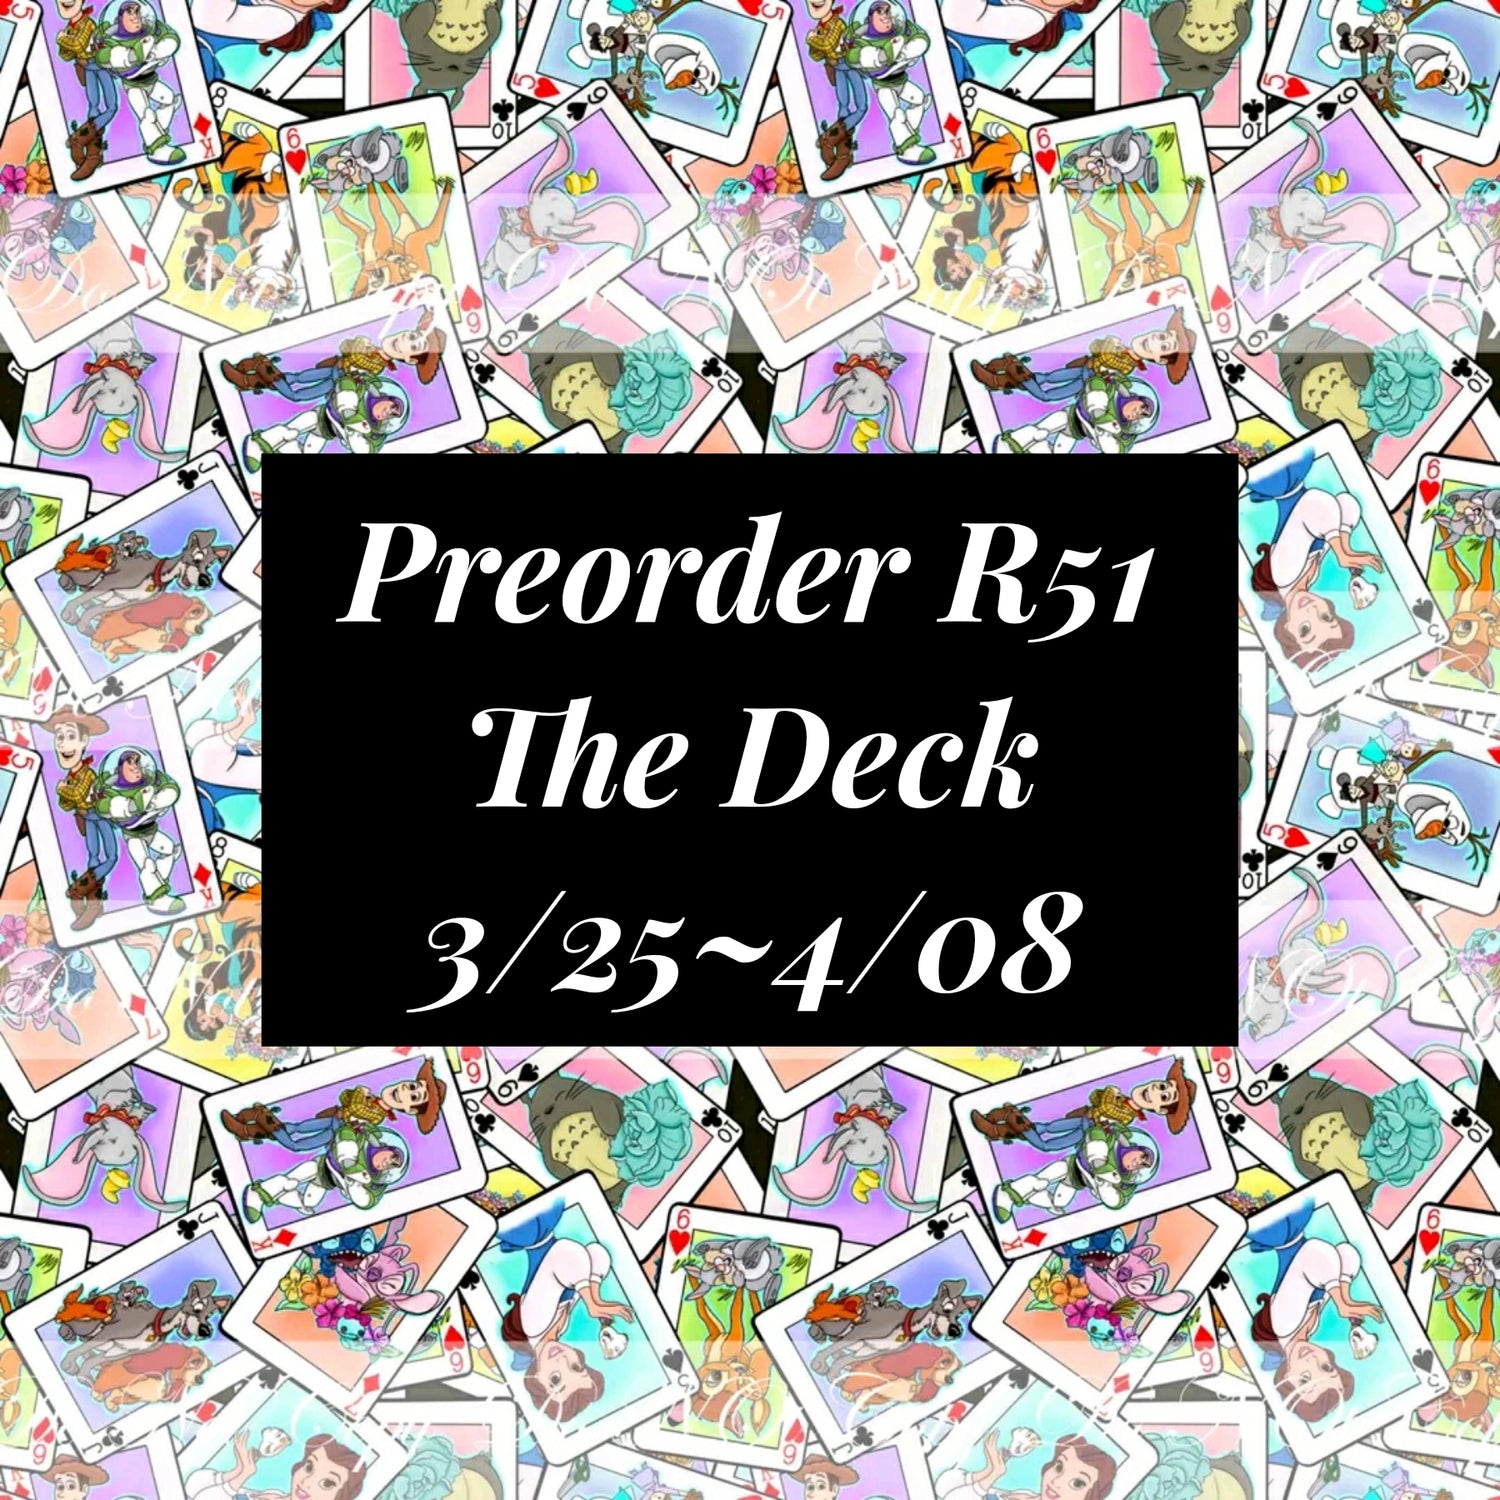 Preorder R51 - The Deck